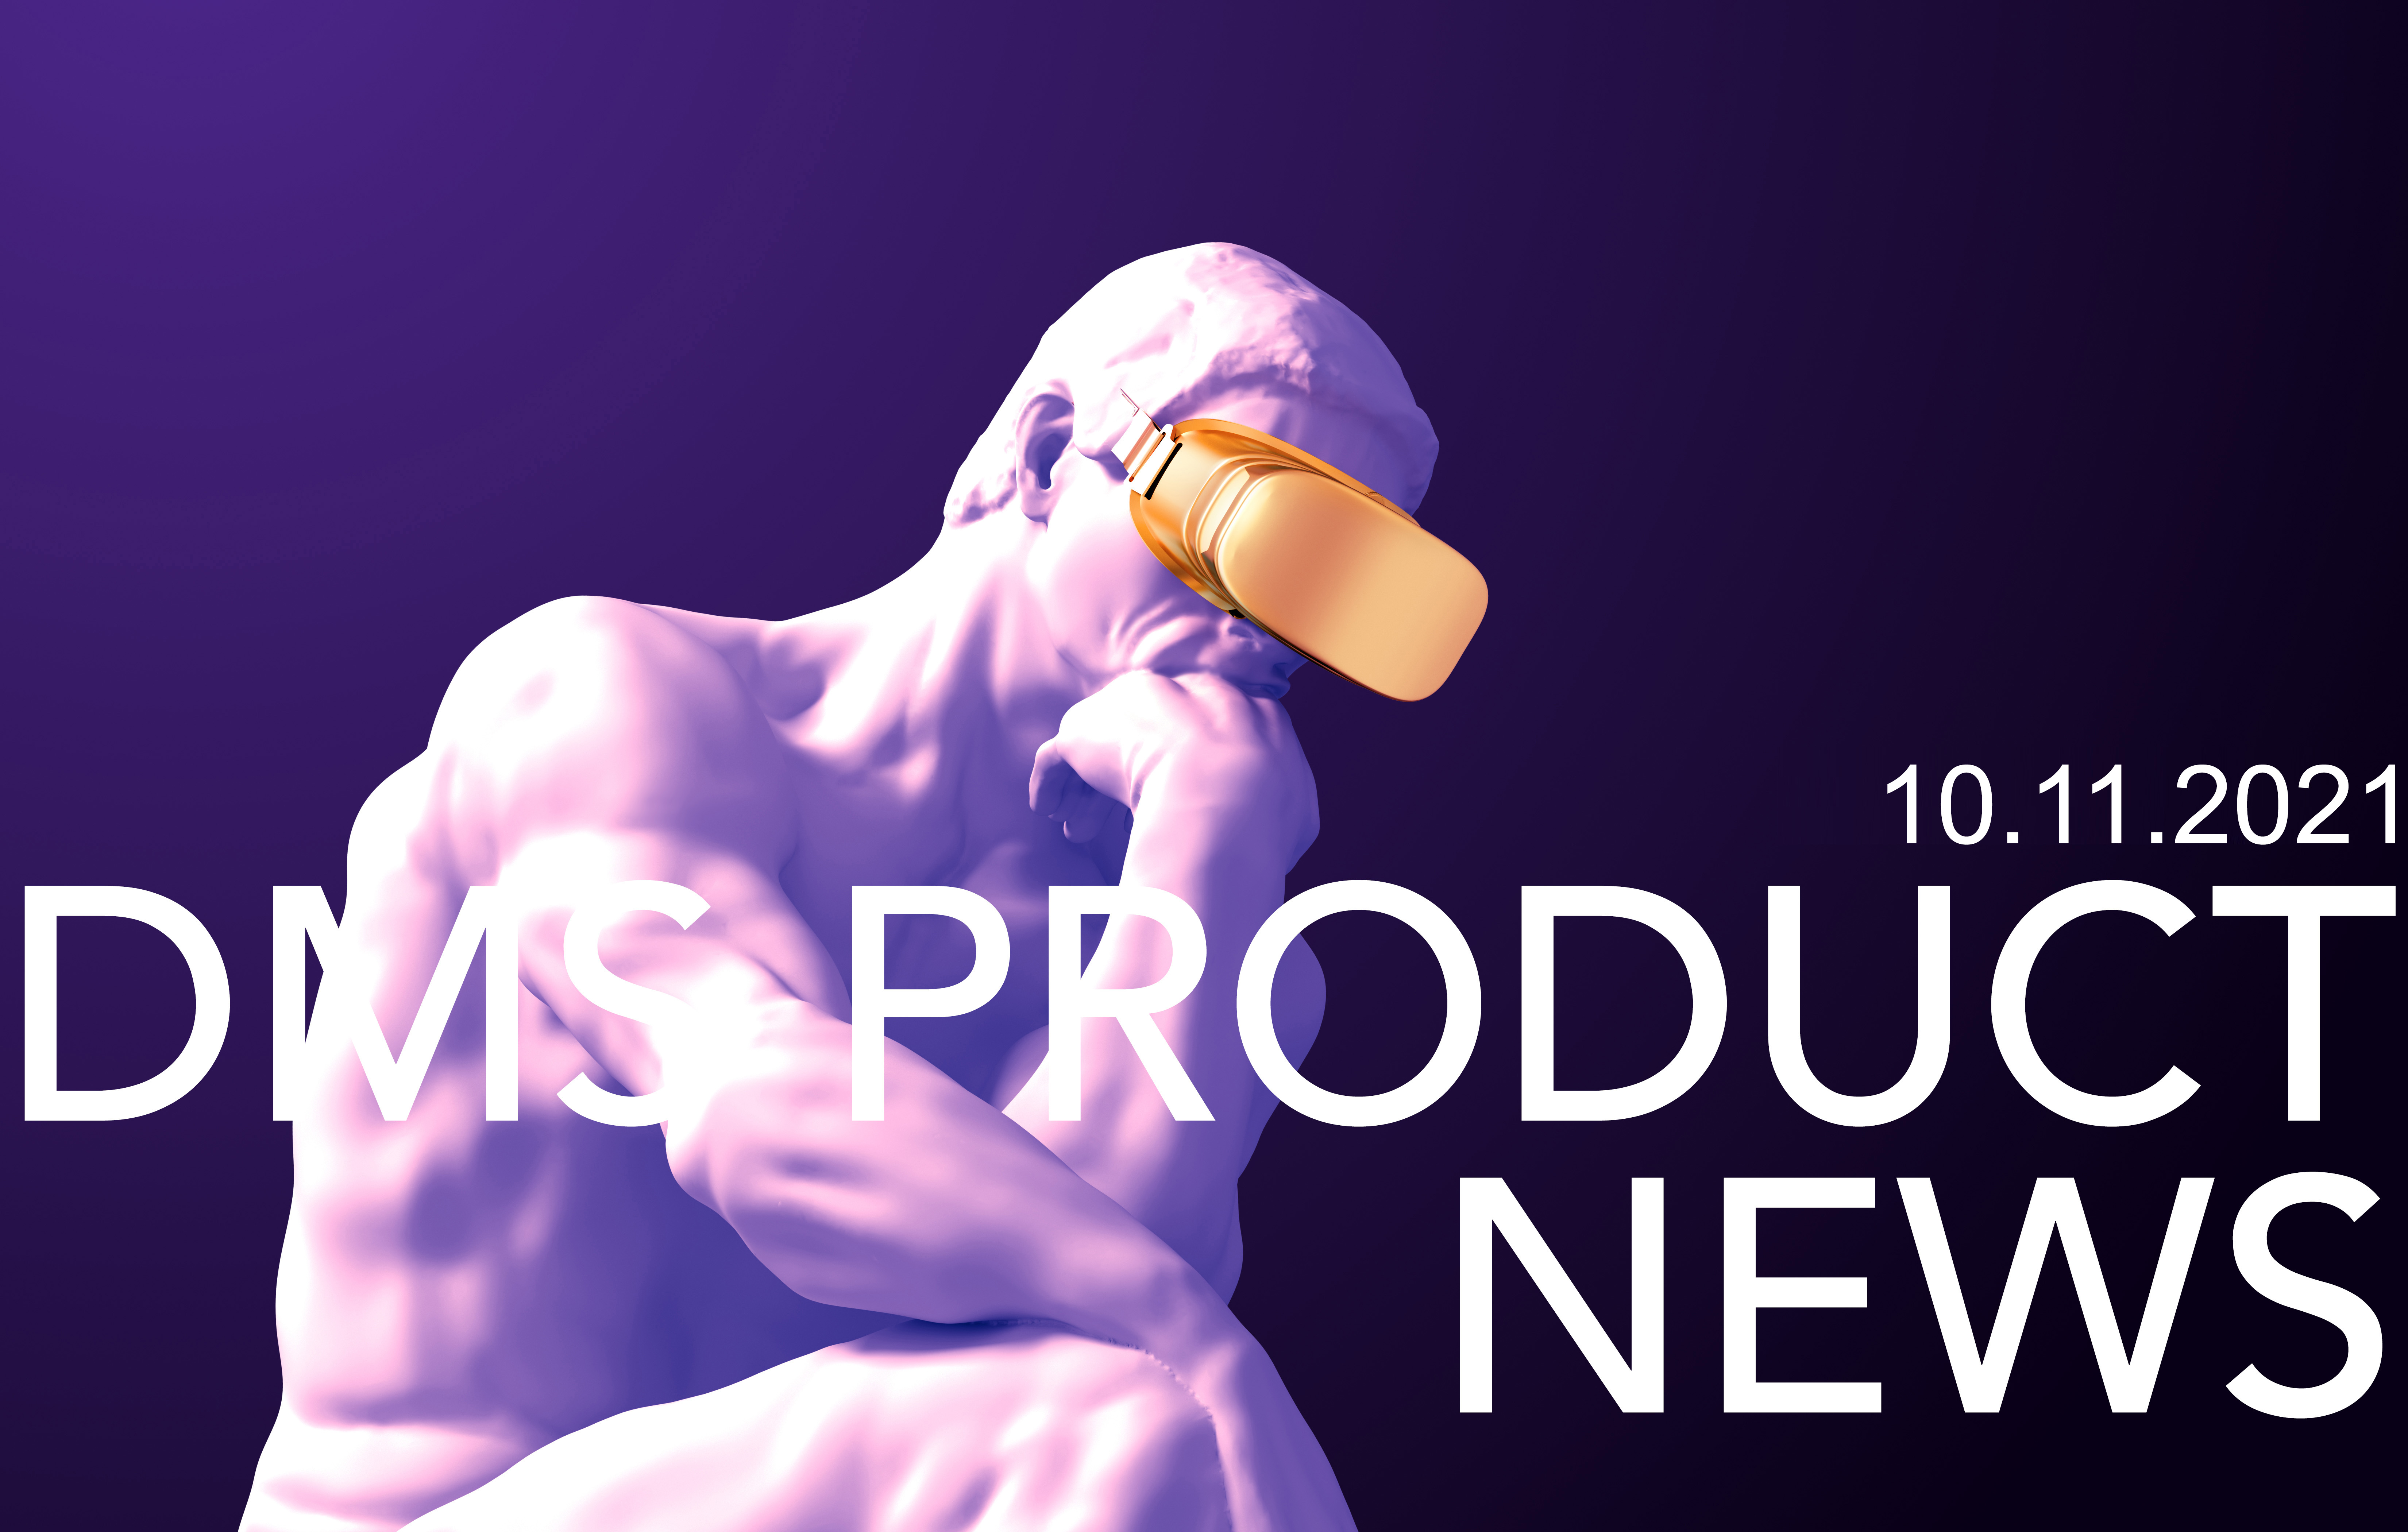    DMS PRODUCT NEWS